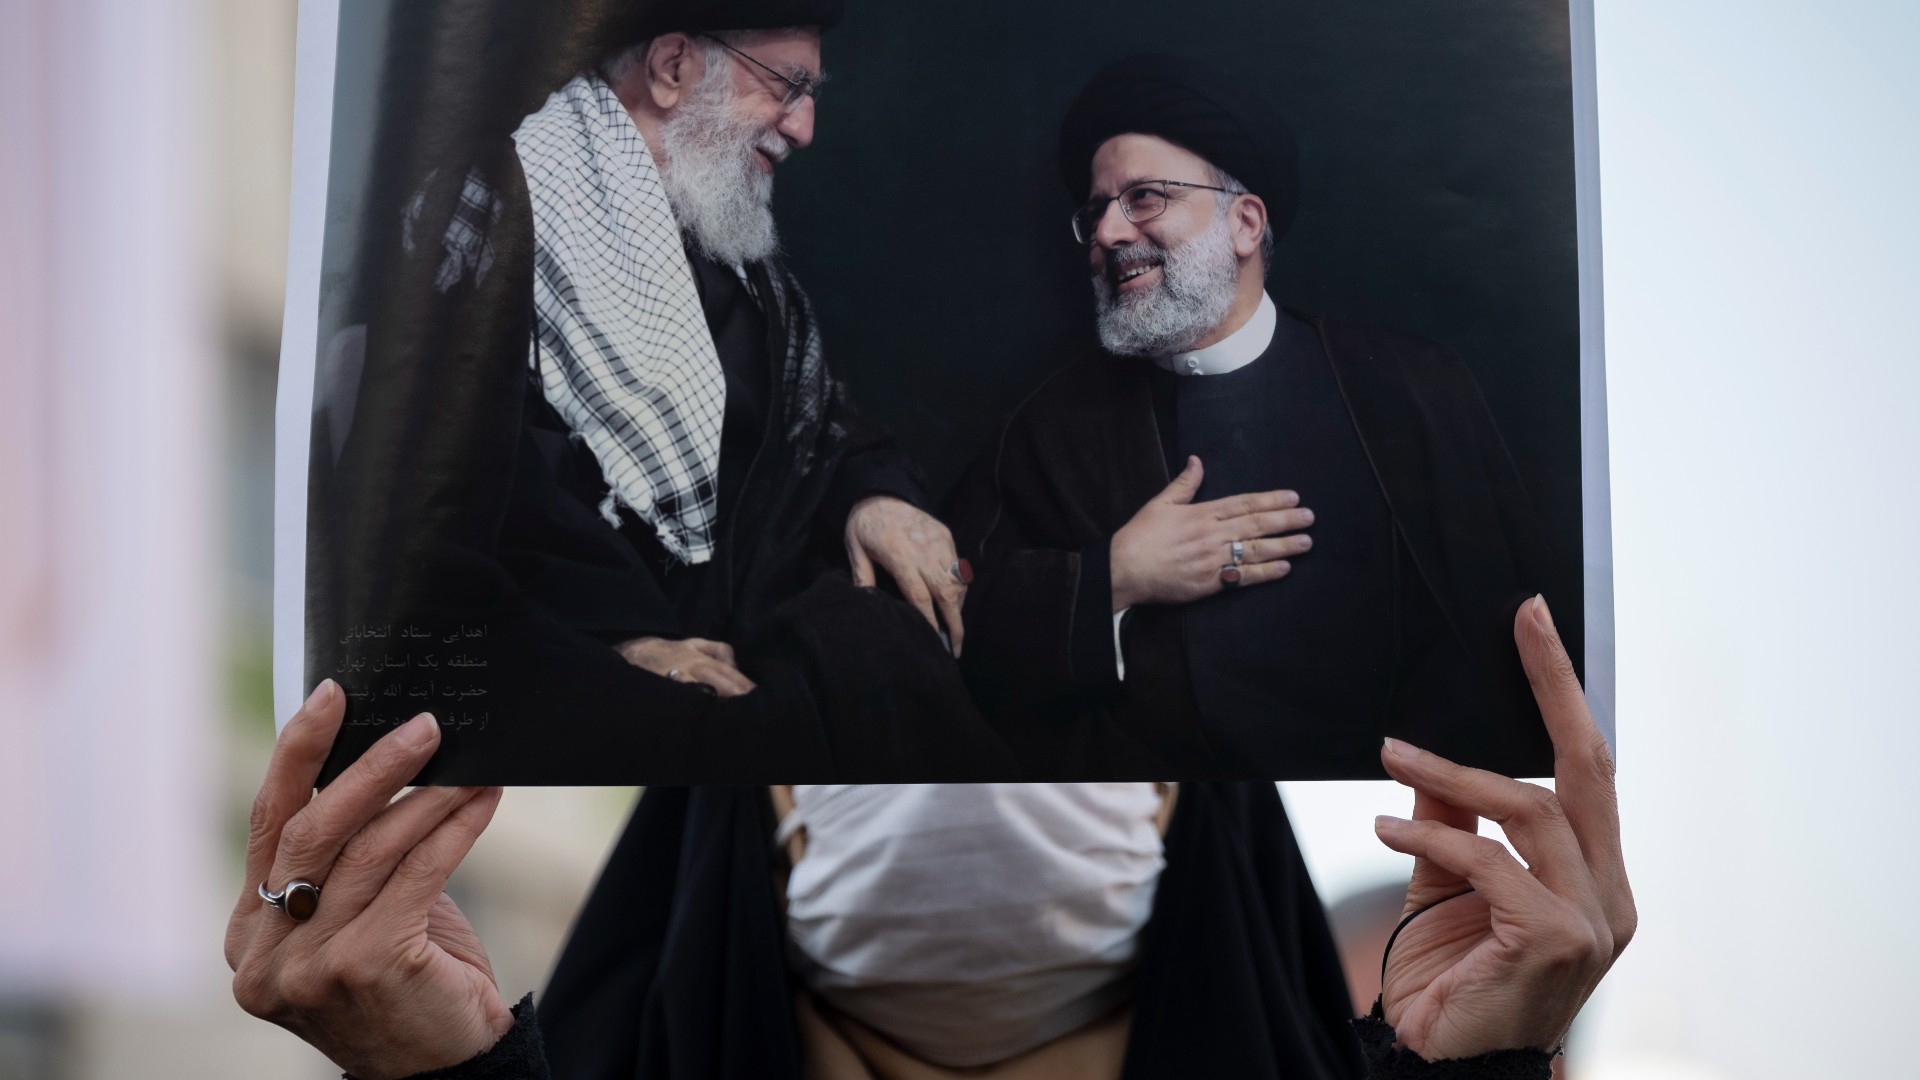 A supporter of Ebrahim Raisi holds an image with portraits of him and Supreme Leader Ayatollah Ali Khamenei, left, during the 2021 presidential election (Reuters)